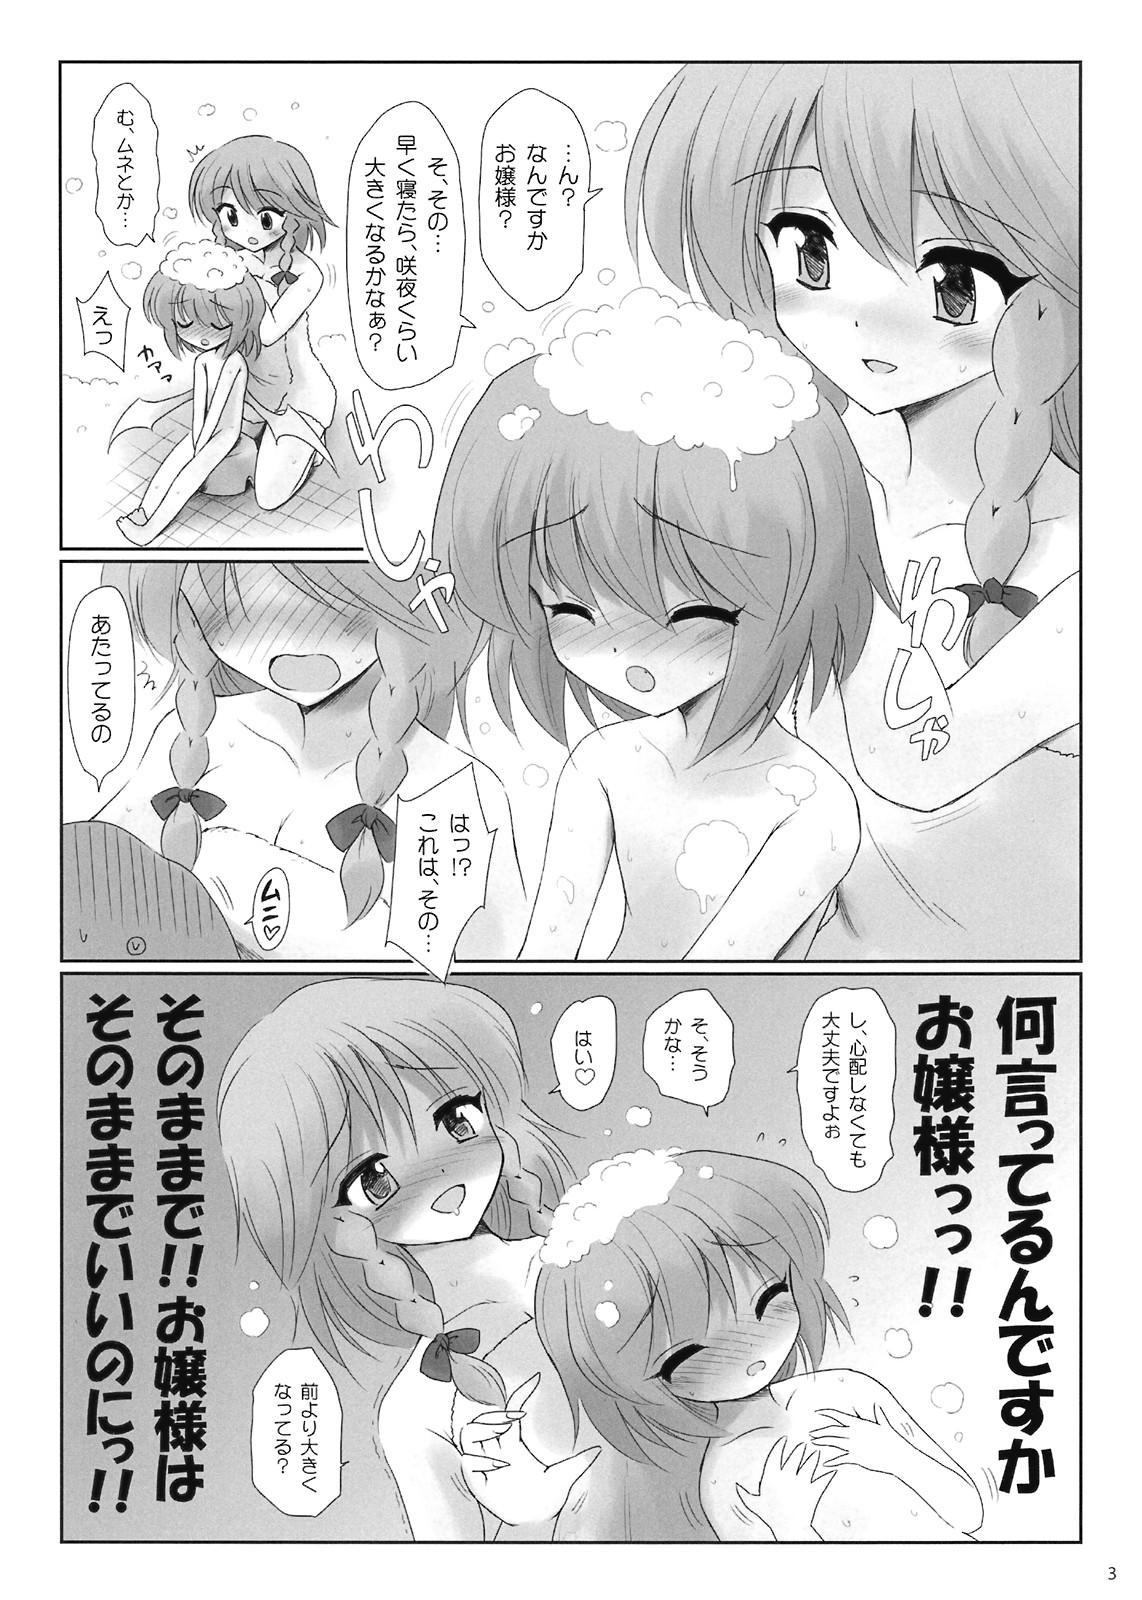 Dildo Fucking コピー本 - Touhou project Blackmail - Page 3